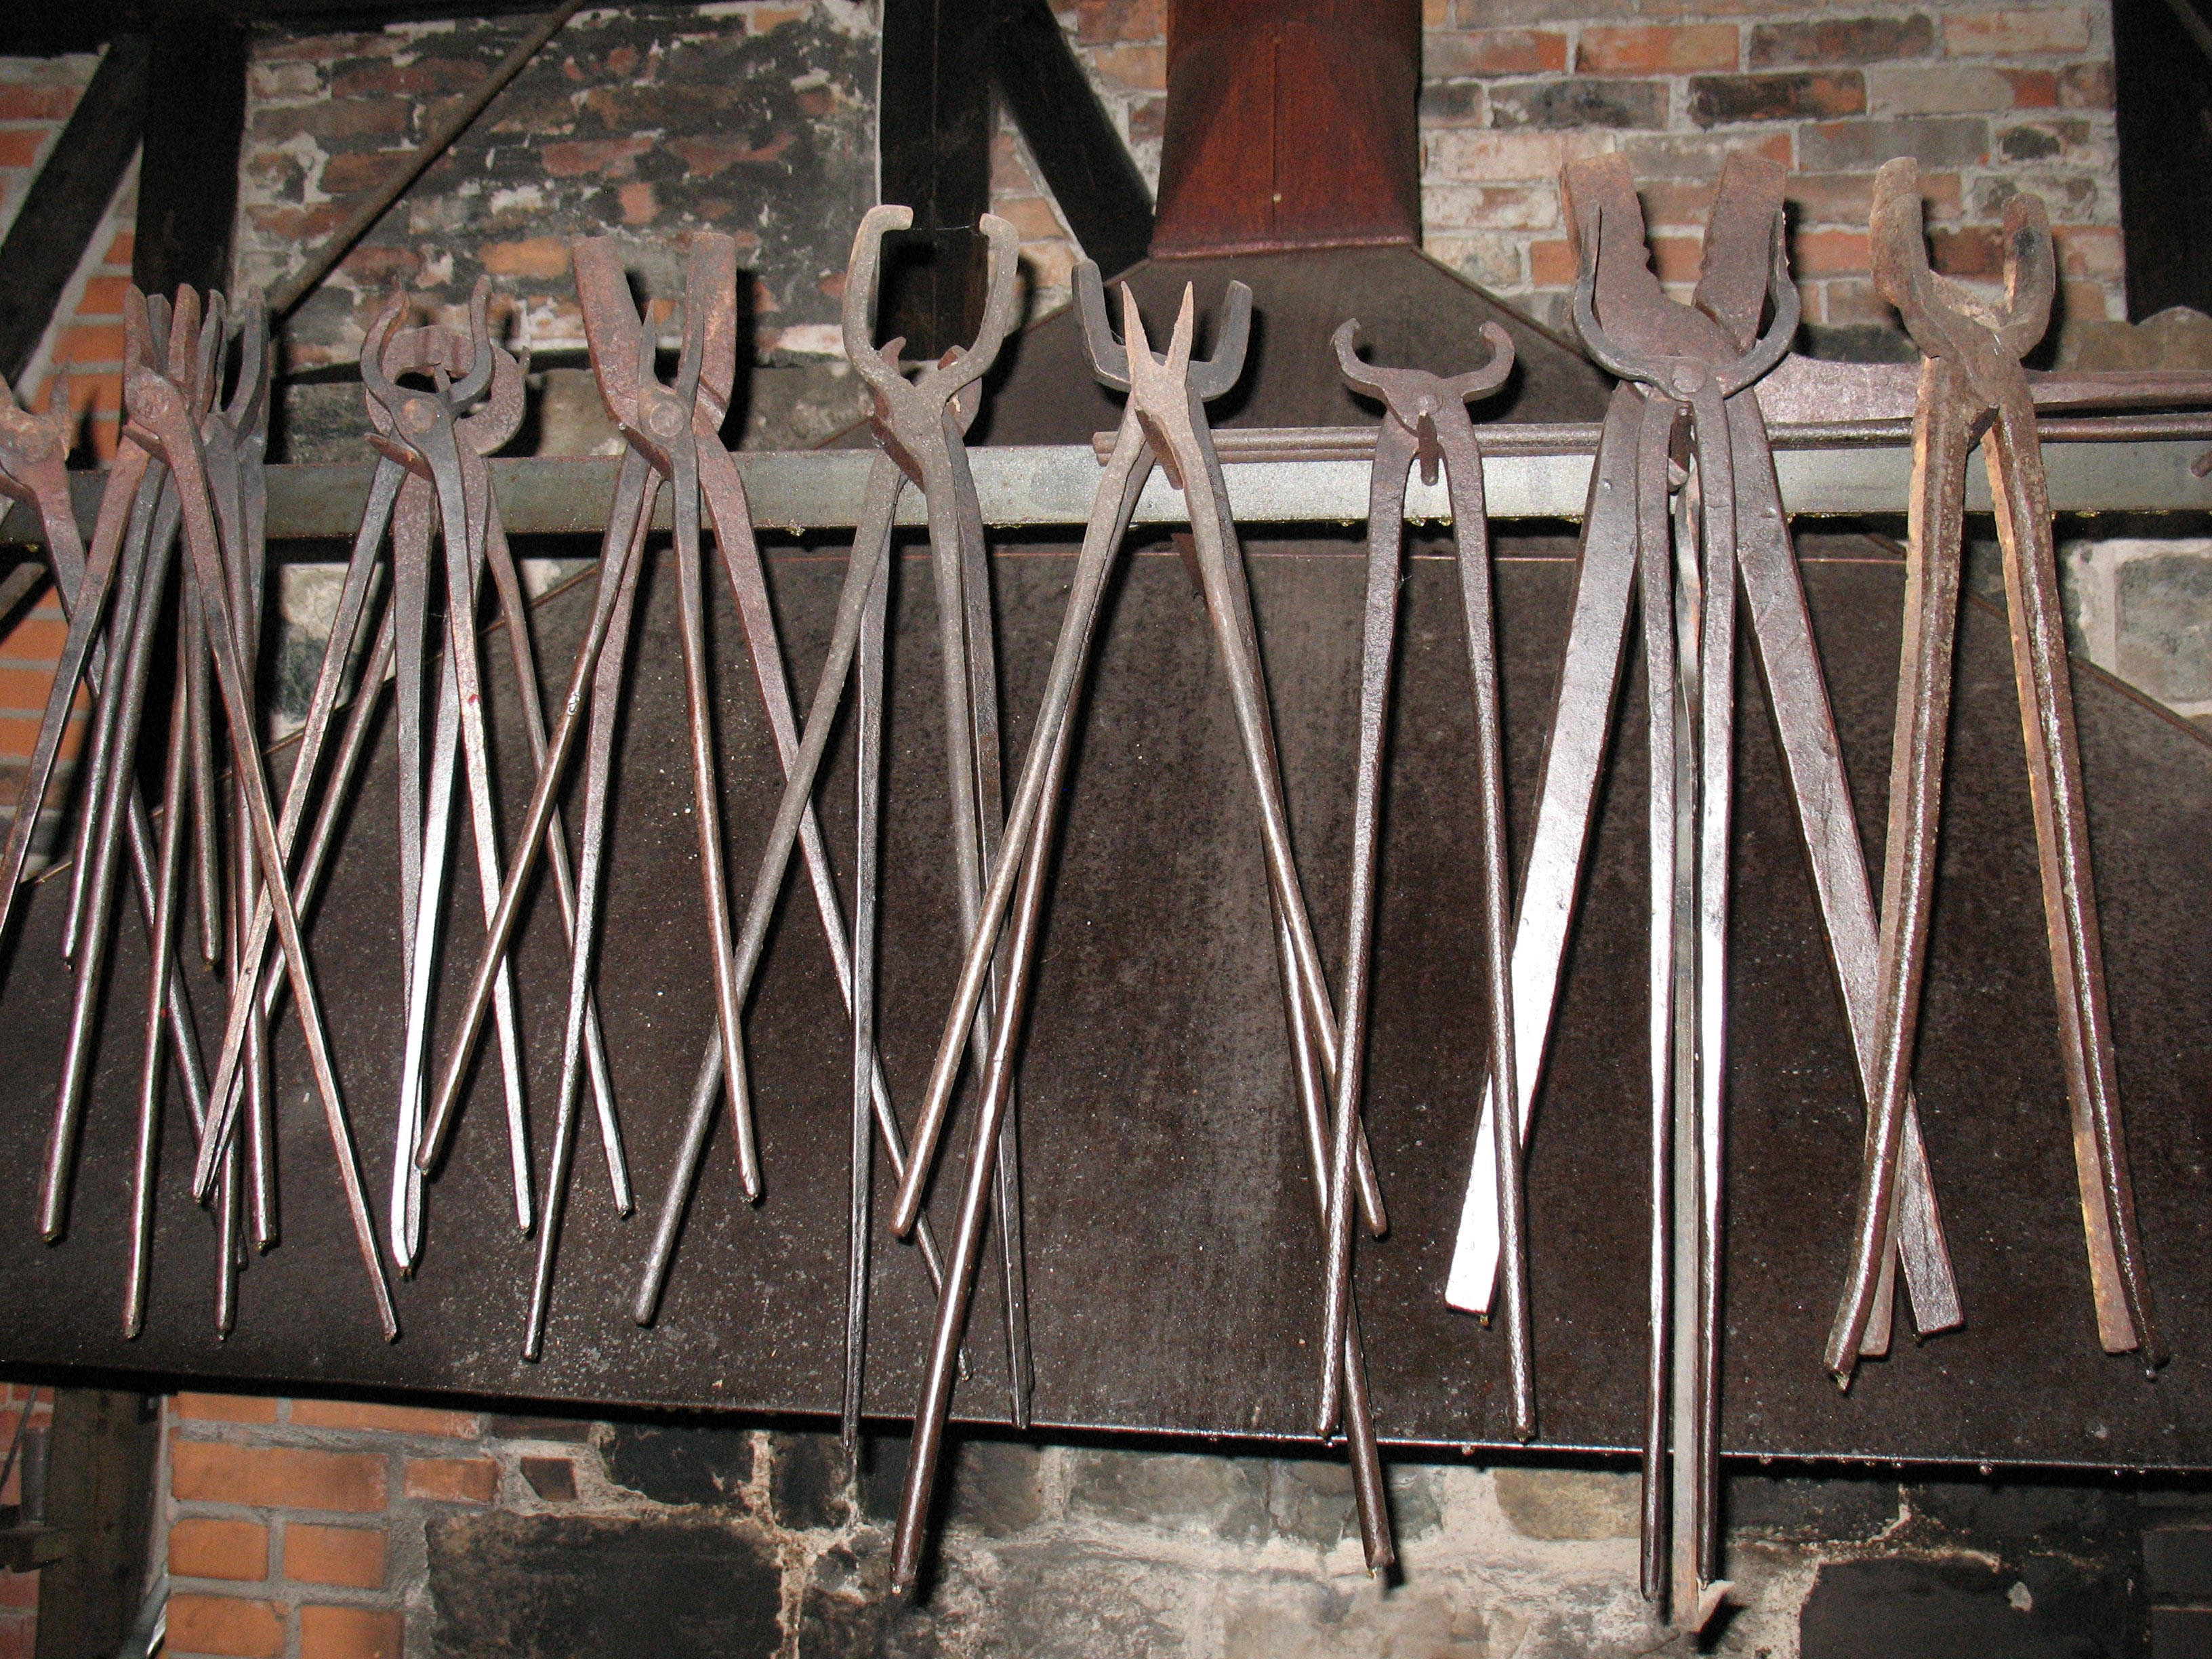 Early Iron Workers' Tools